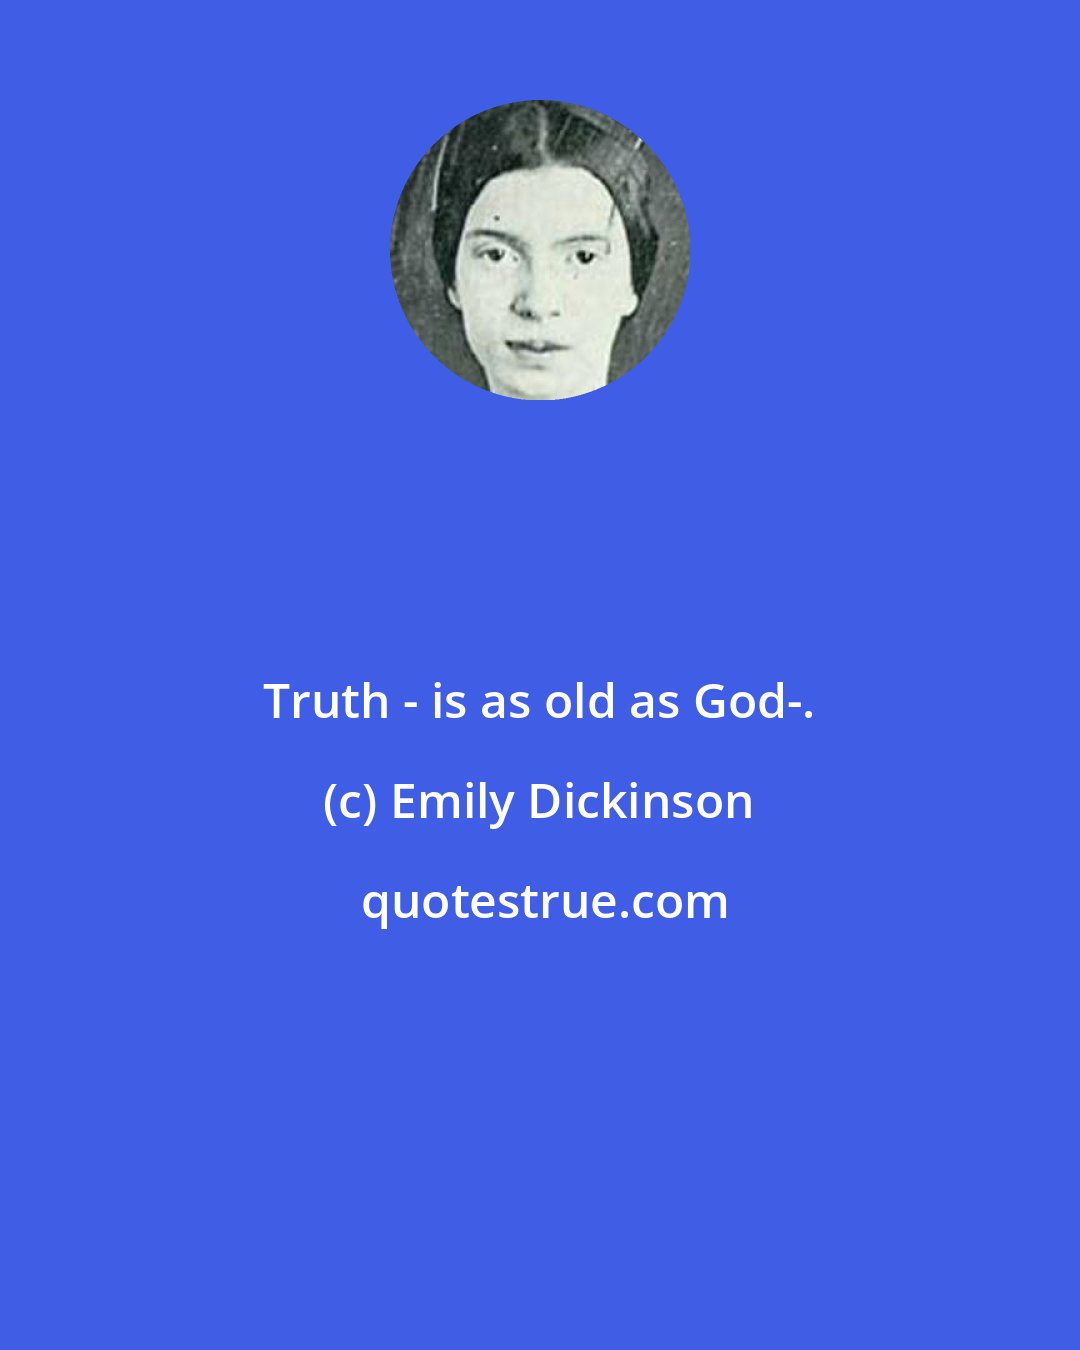 Emily Dickinson: Truth - is as old as God-.